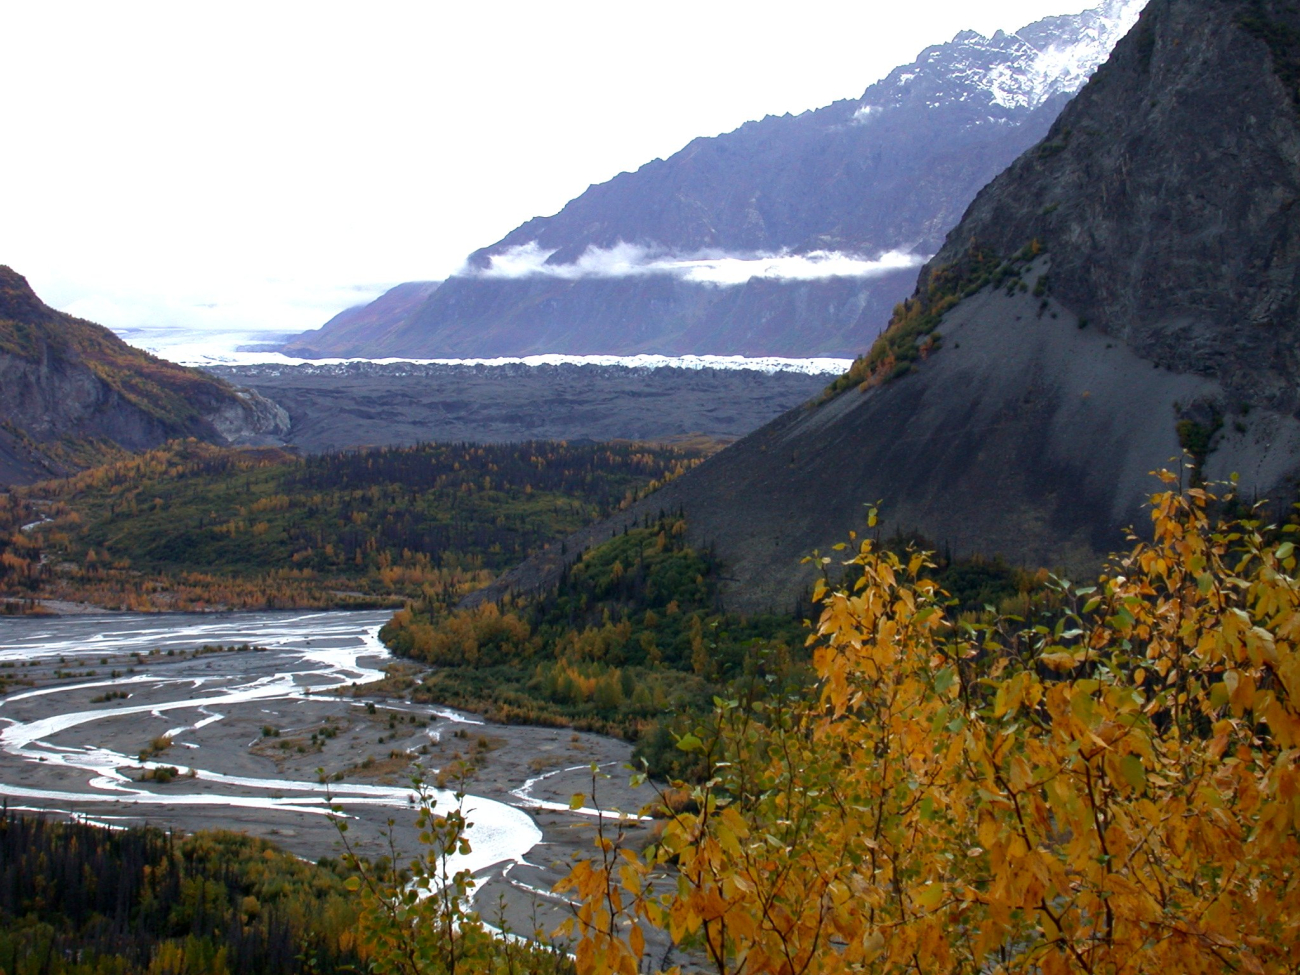 Looking towards a glacier with its braided outwash stream below